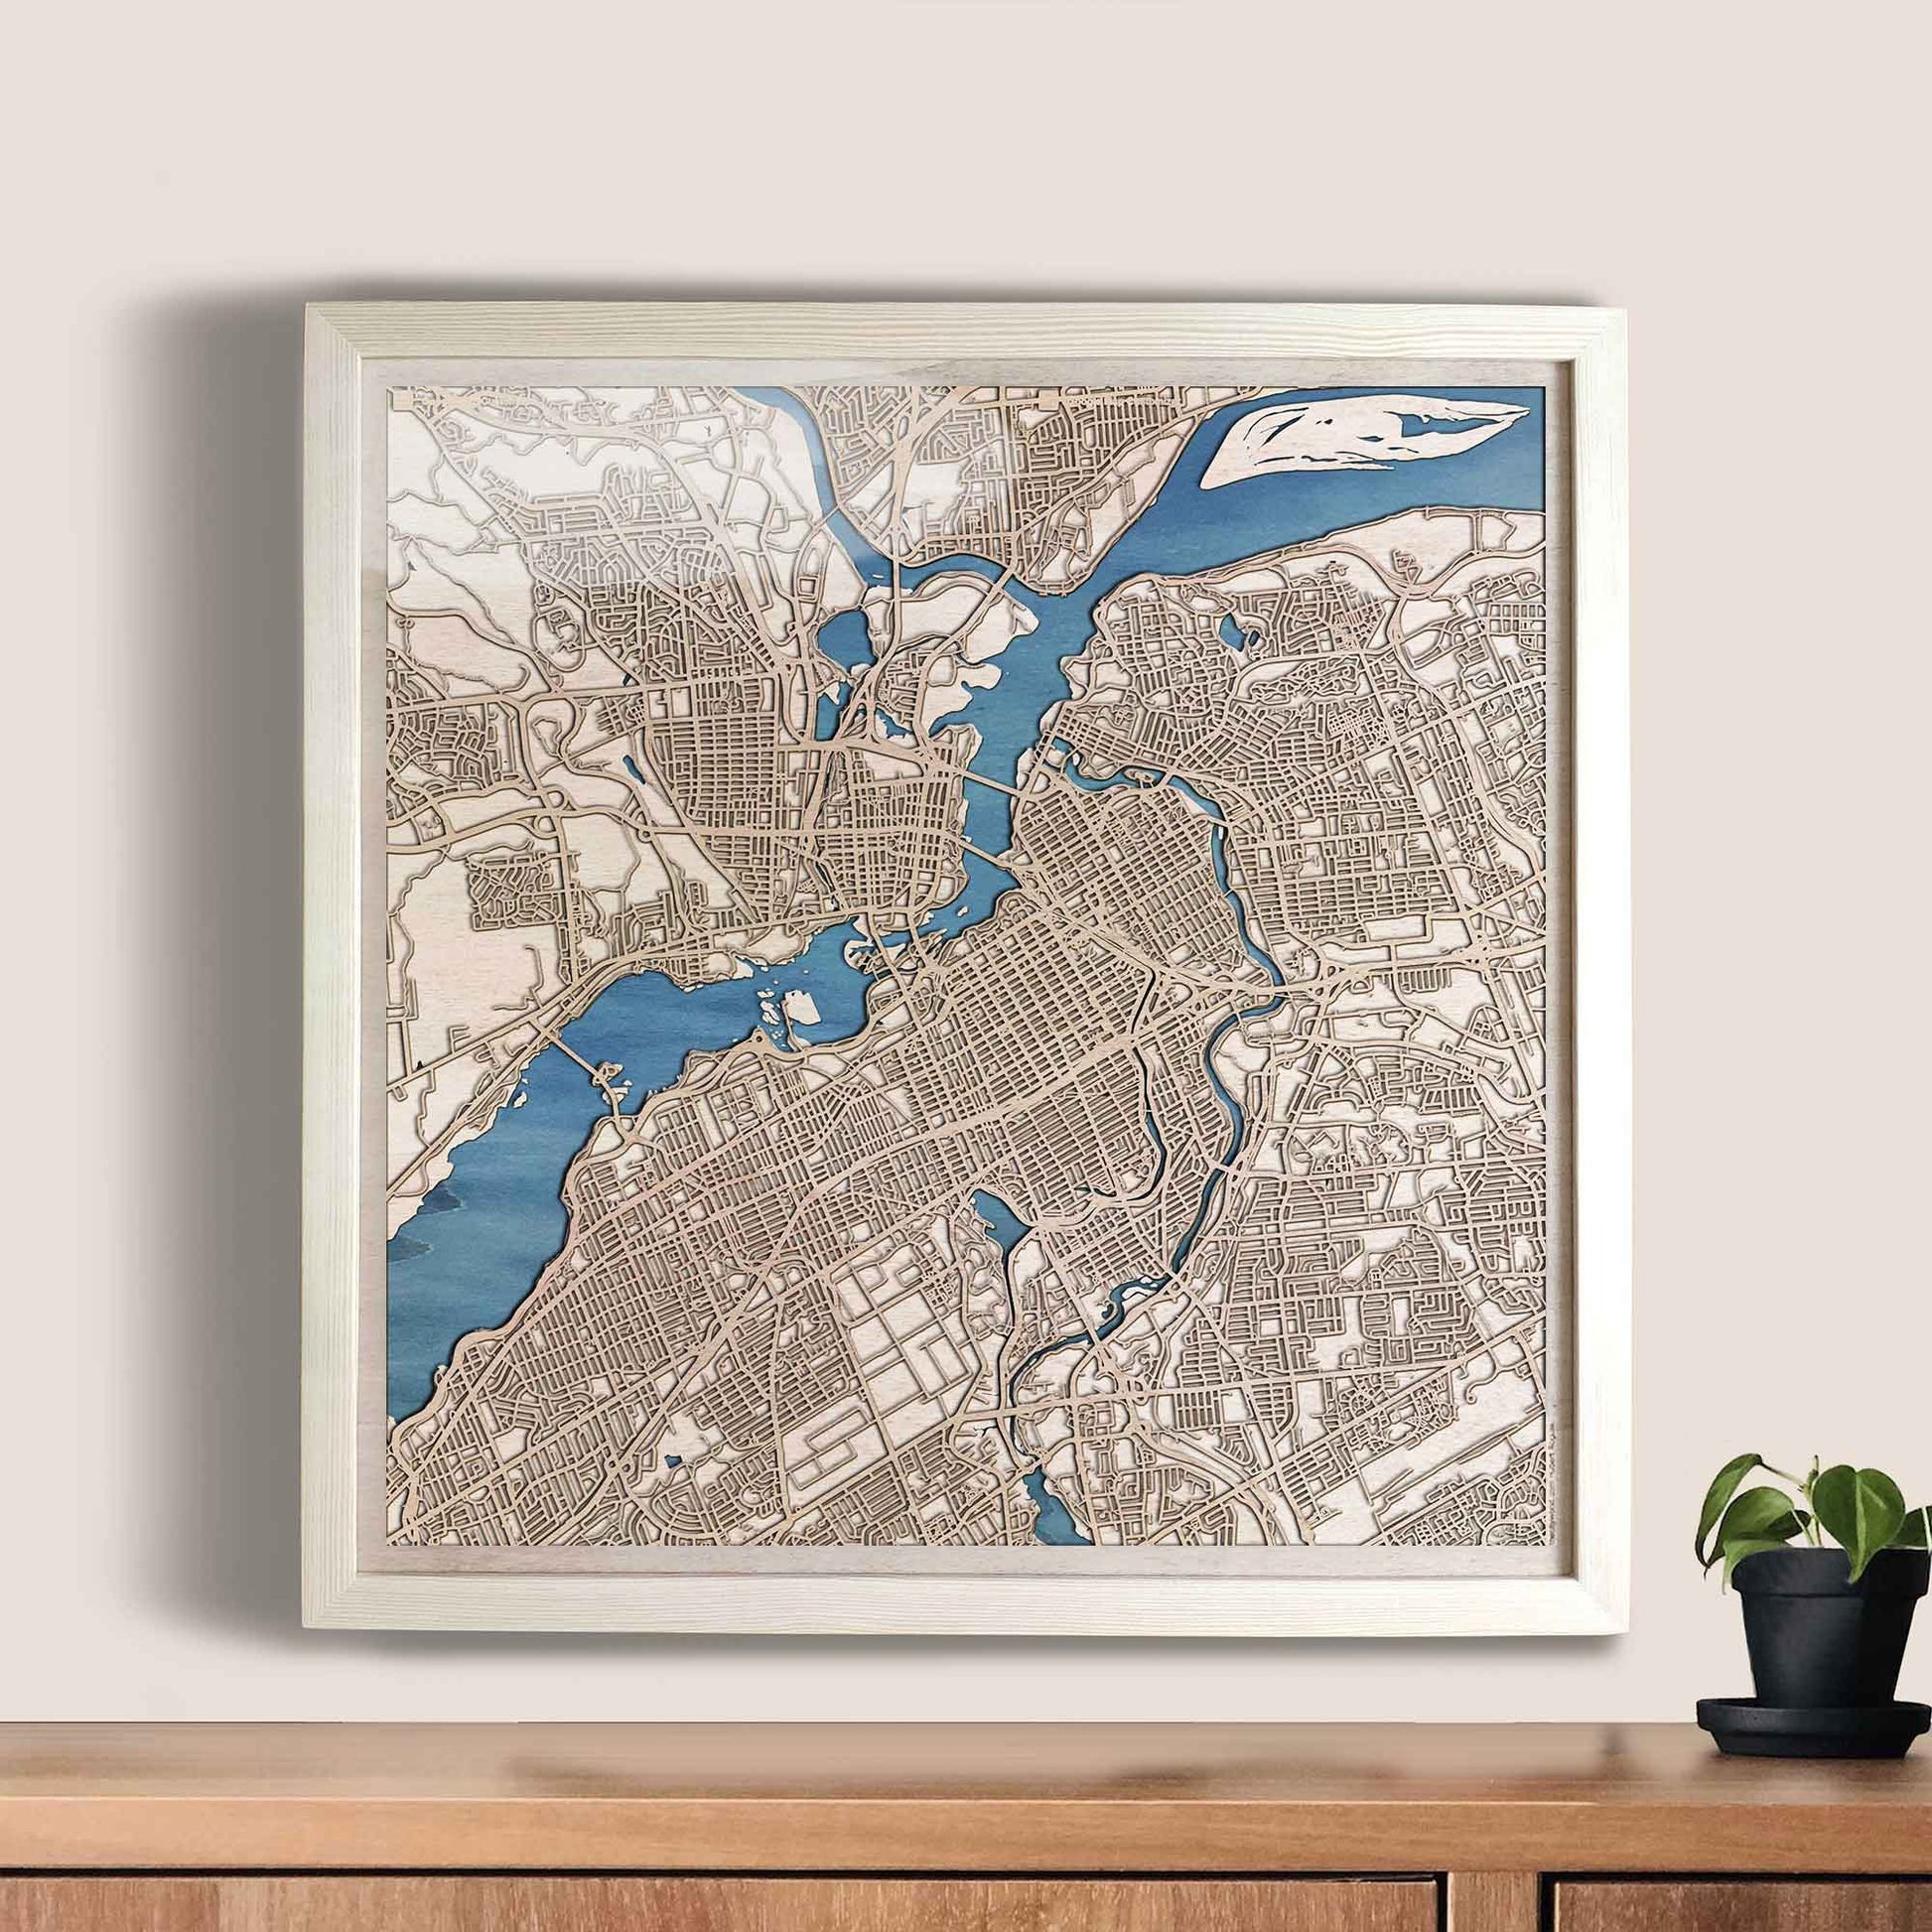 Ottawa Wooden Map by CityWood - Custom Wood Map Art - Unique Laser Cut Engraved - Anniversary Gift